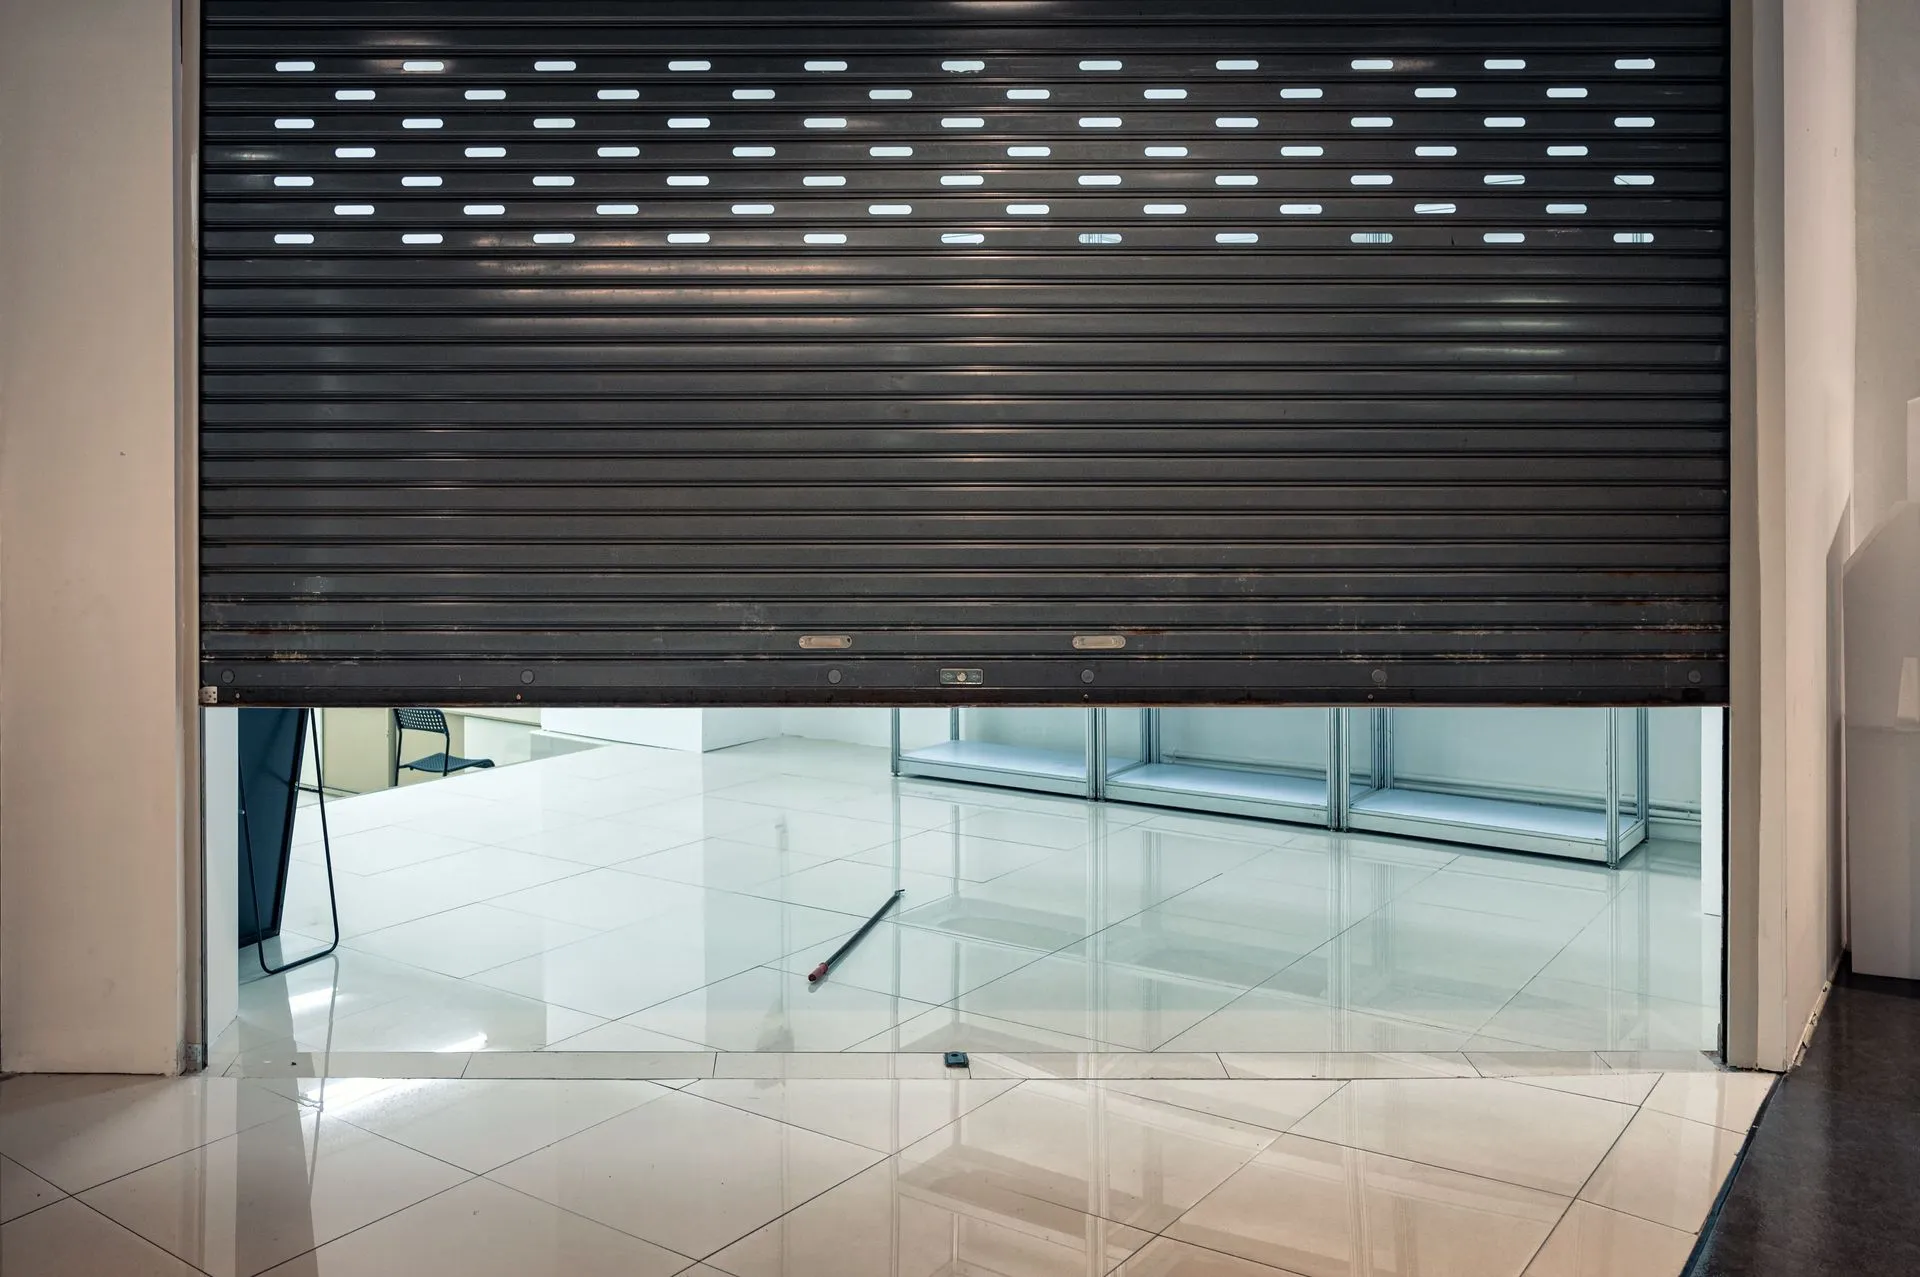 commercial shutter with perforated slats for ventilation.